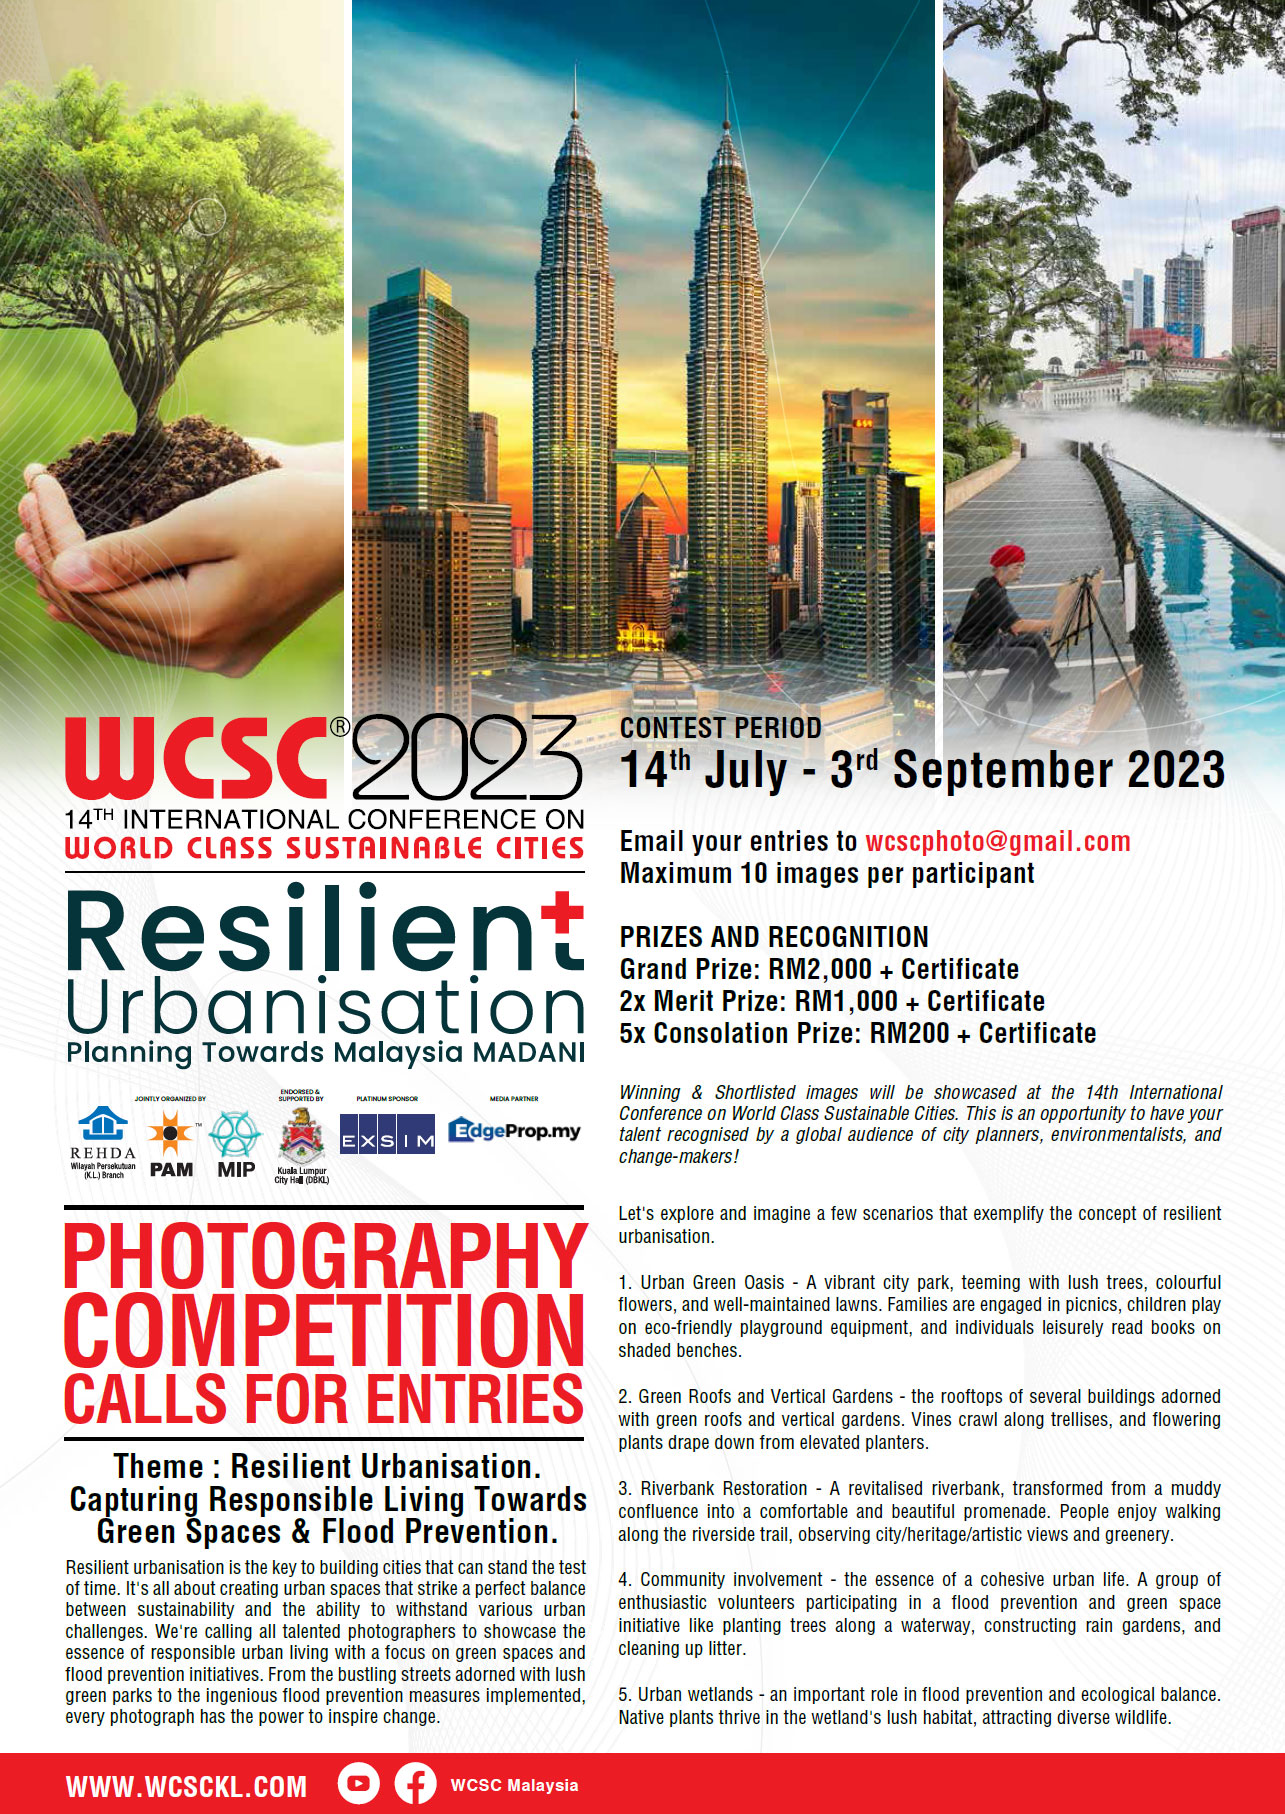 WCSC 2023 Photography Competition